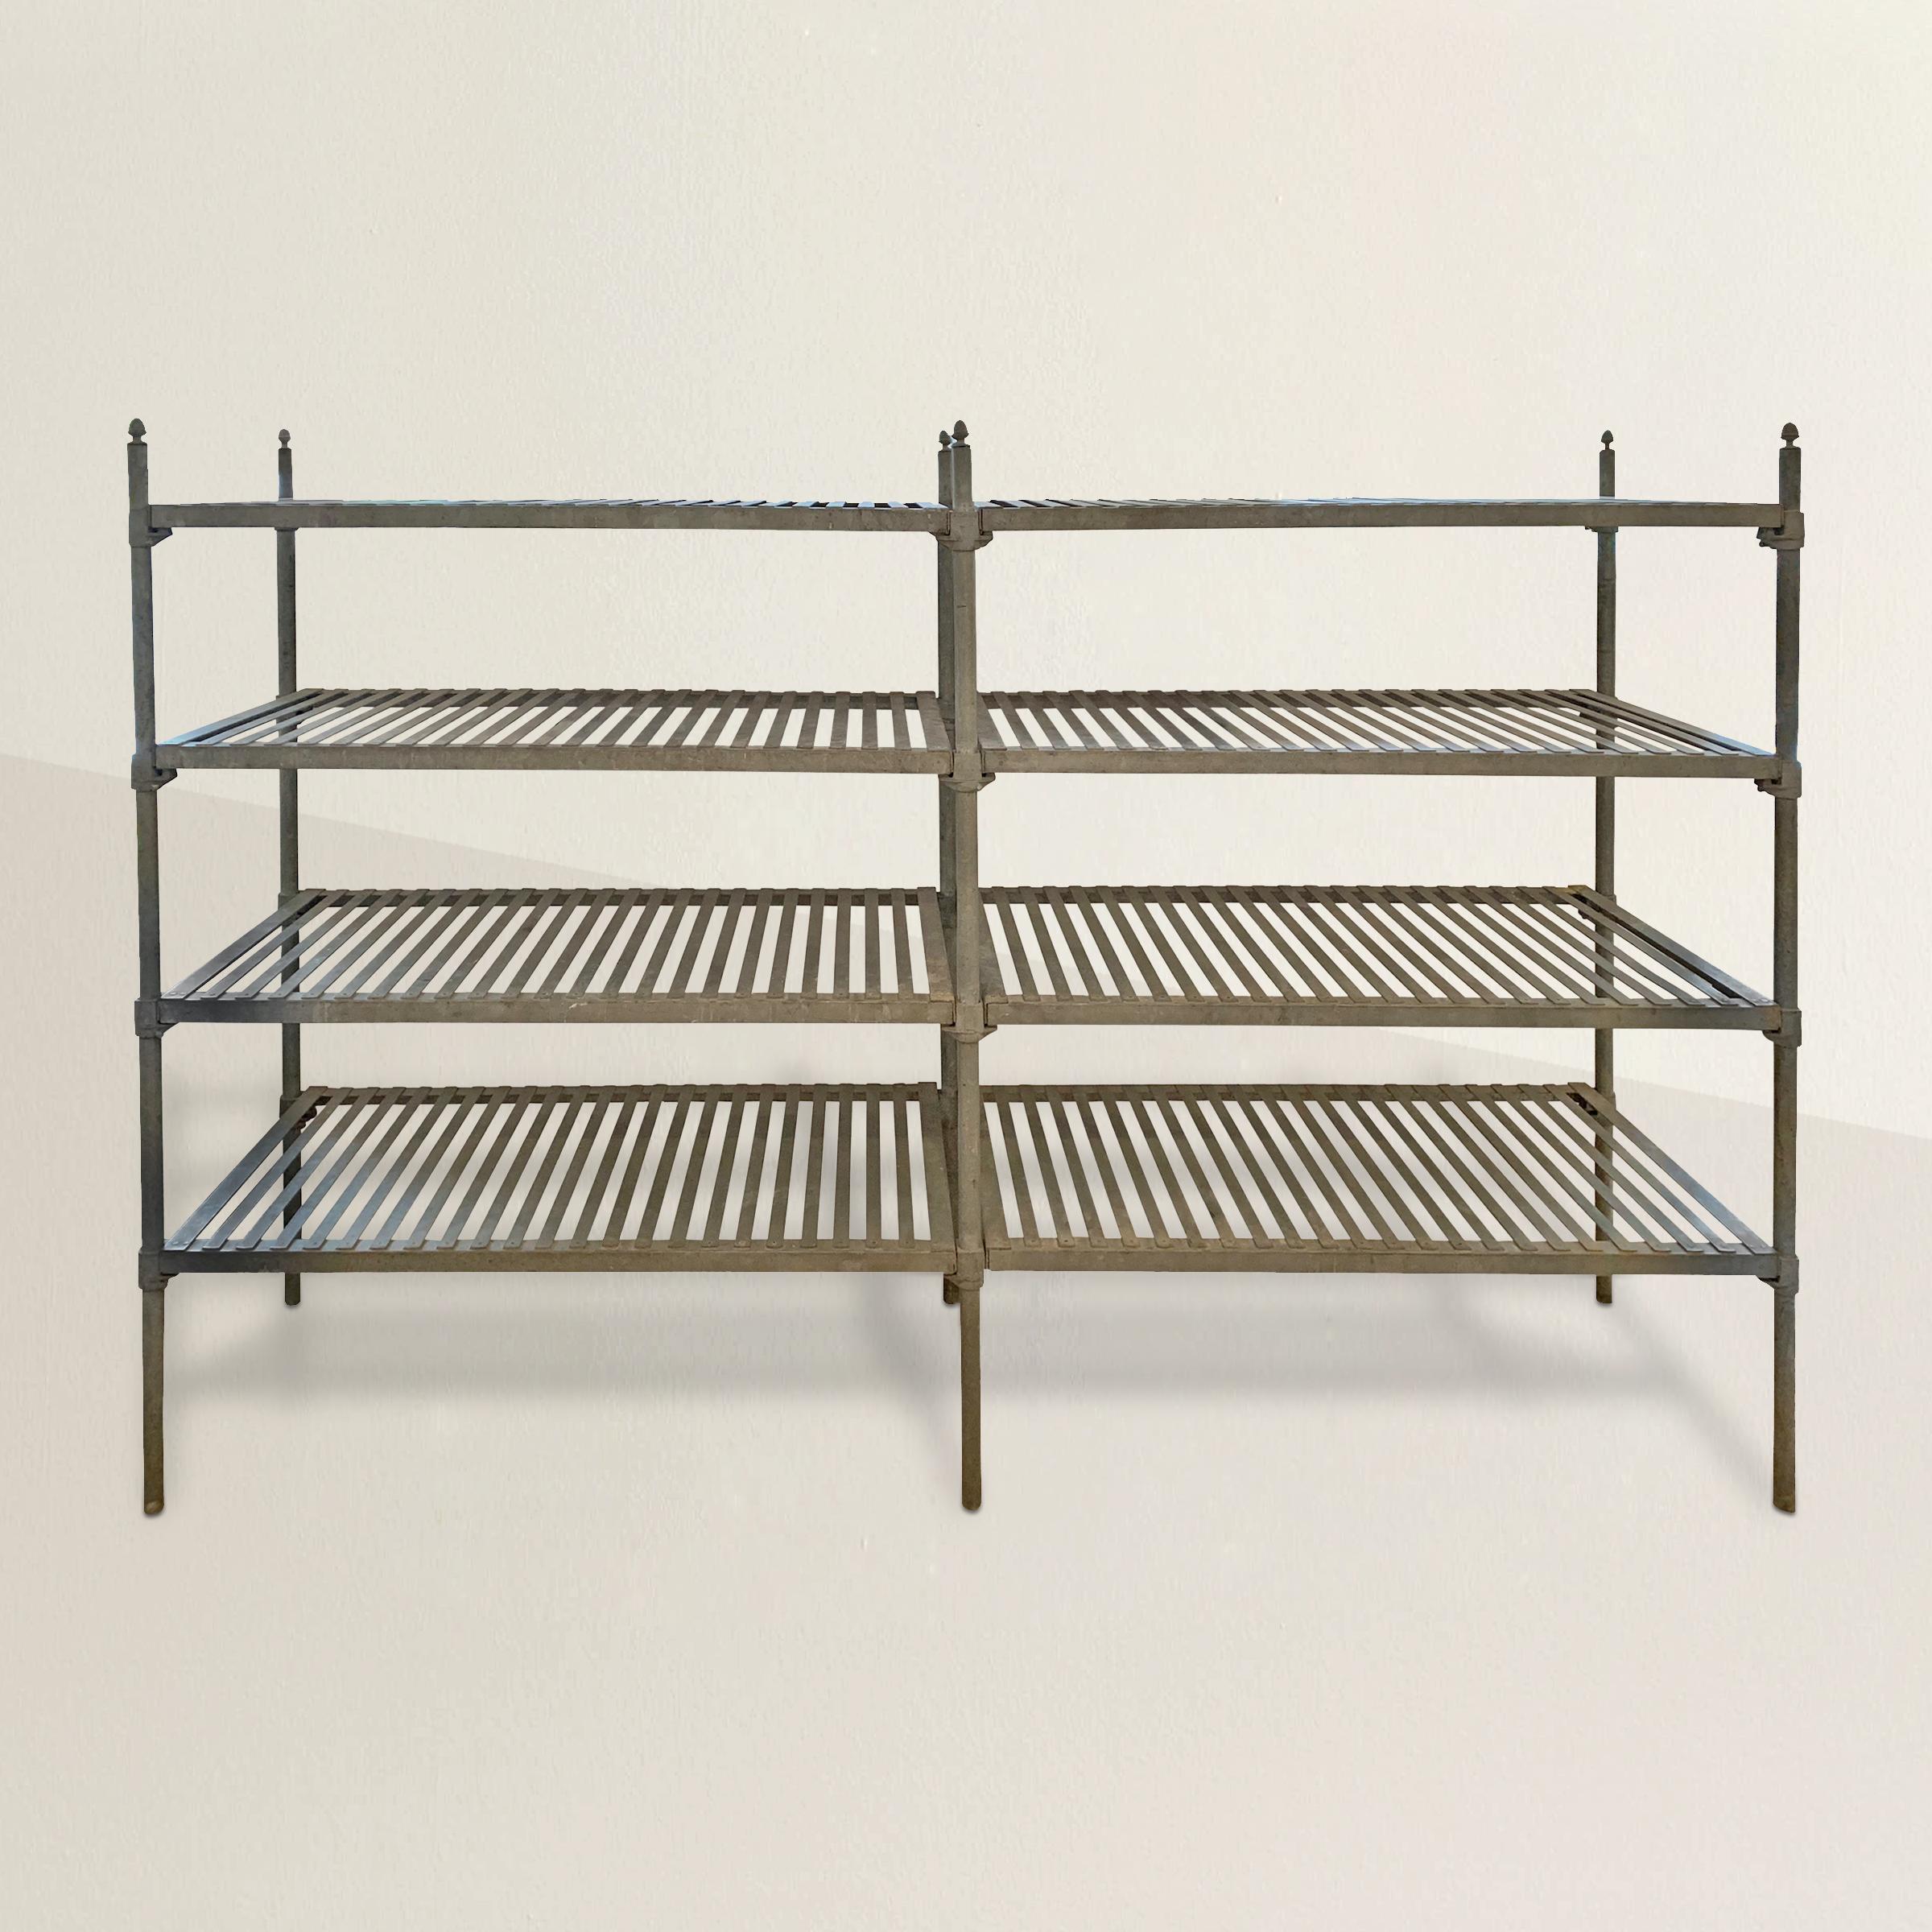 A simple yet chic early 20th century French industrial galvanized zinc shelving unit from a commercial kitchen or bakery with slatted shelves with uprights with whimsical acorn finials. The unit comes apart completely, and can even be configured for